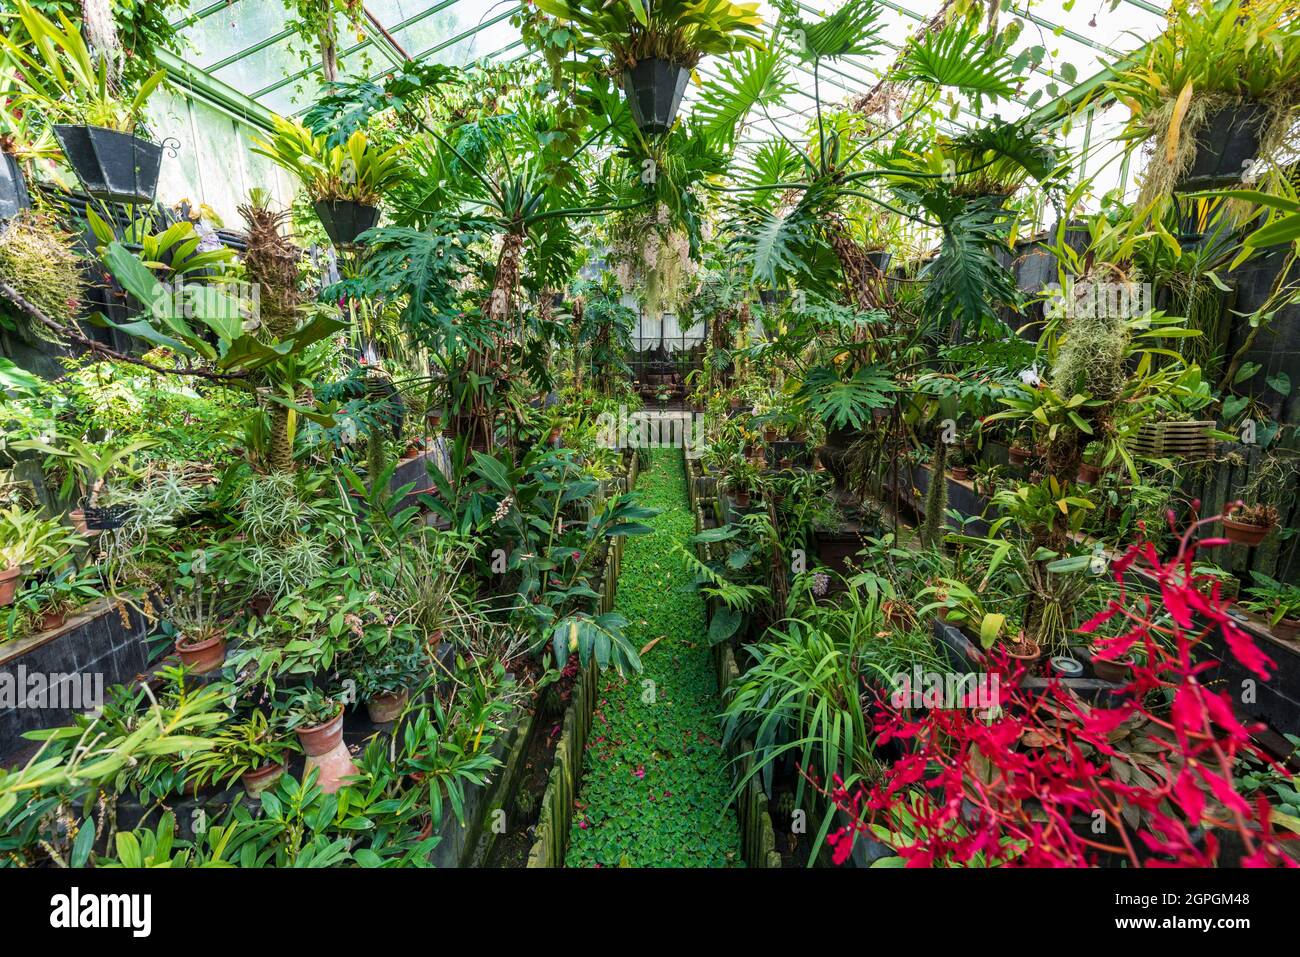 France, Eure, Sainte Opportune du Bosc, Castle and Battlefield Garden by interior designer Jacques Garcia, greenhouses with a collection of orchids Stock Photo